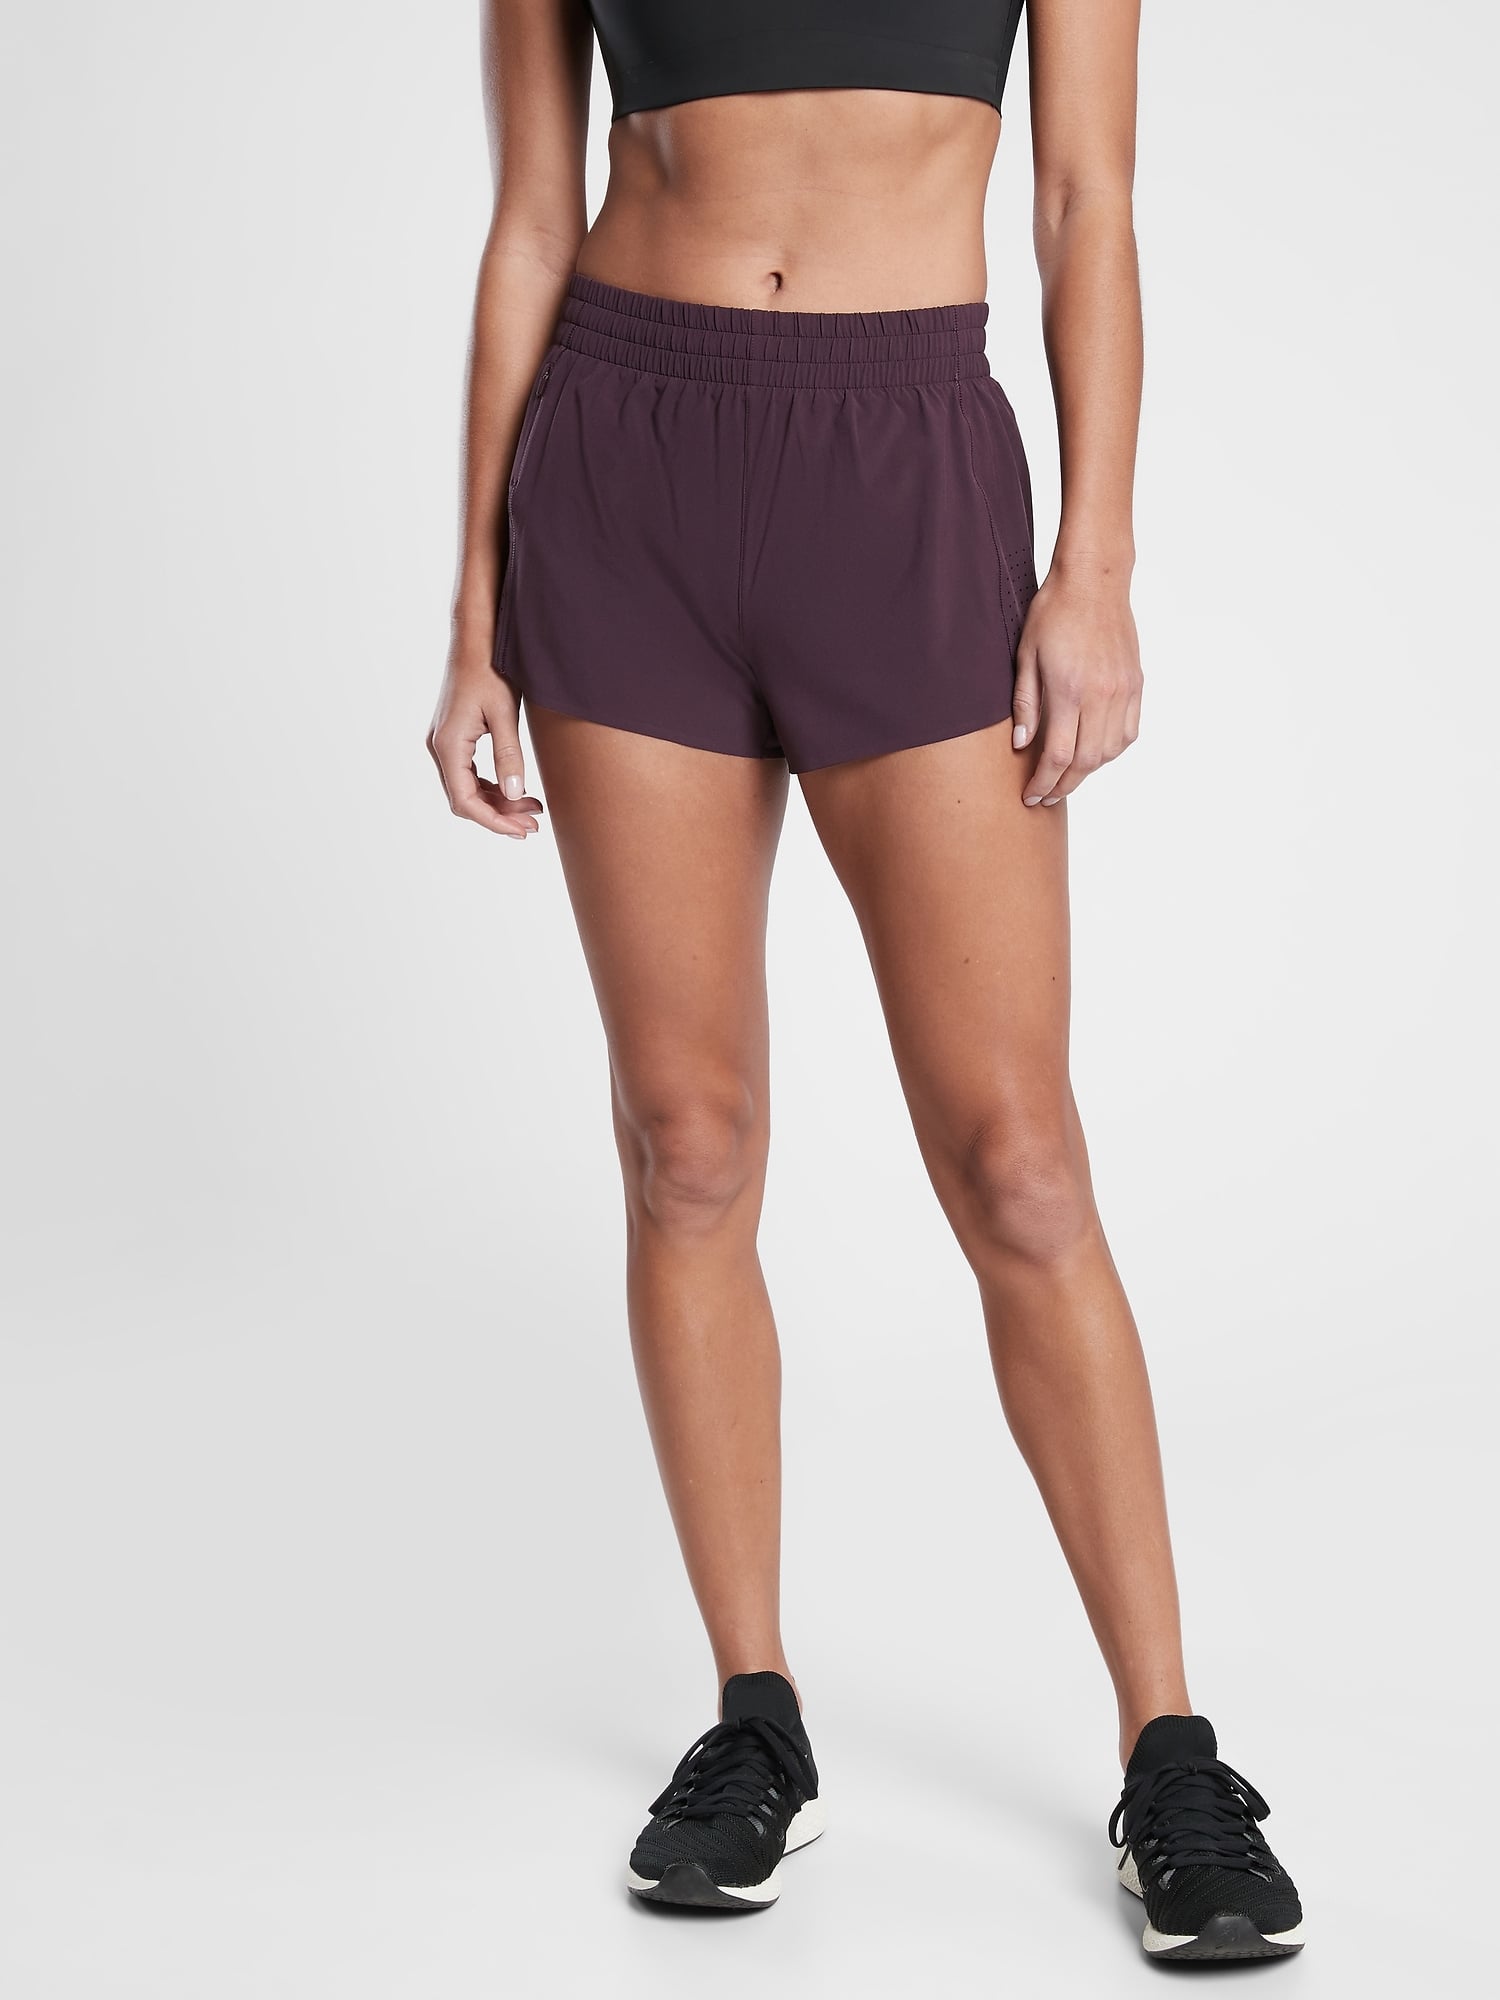 Athleta Hustle Short  In Honour of Spring, We're Shopping These